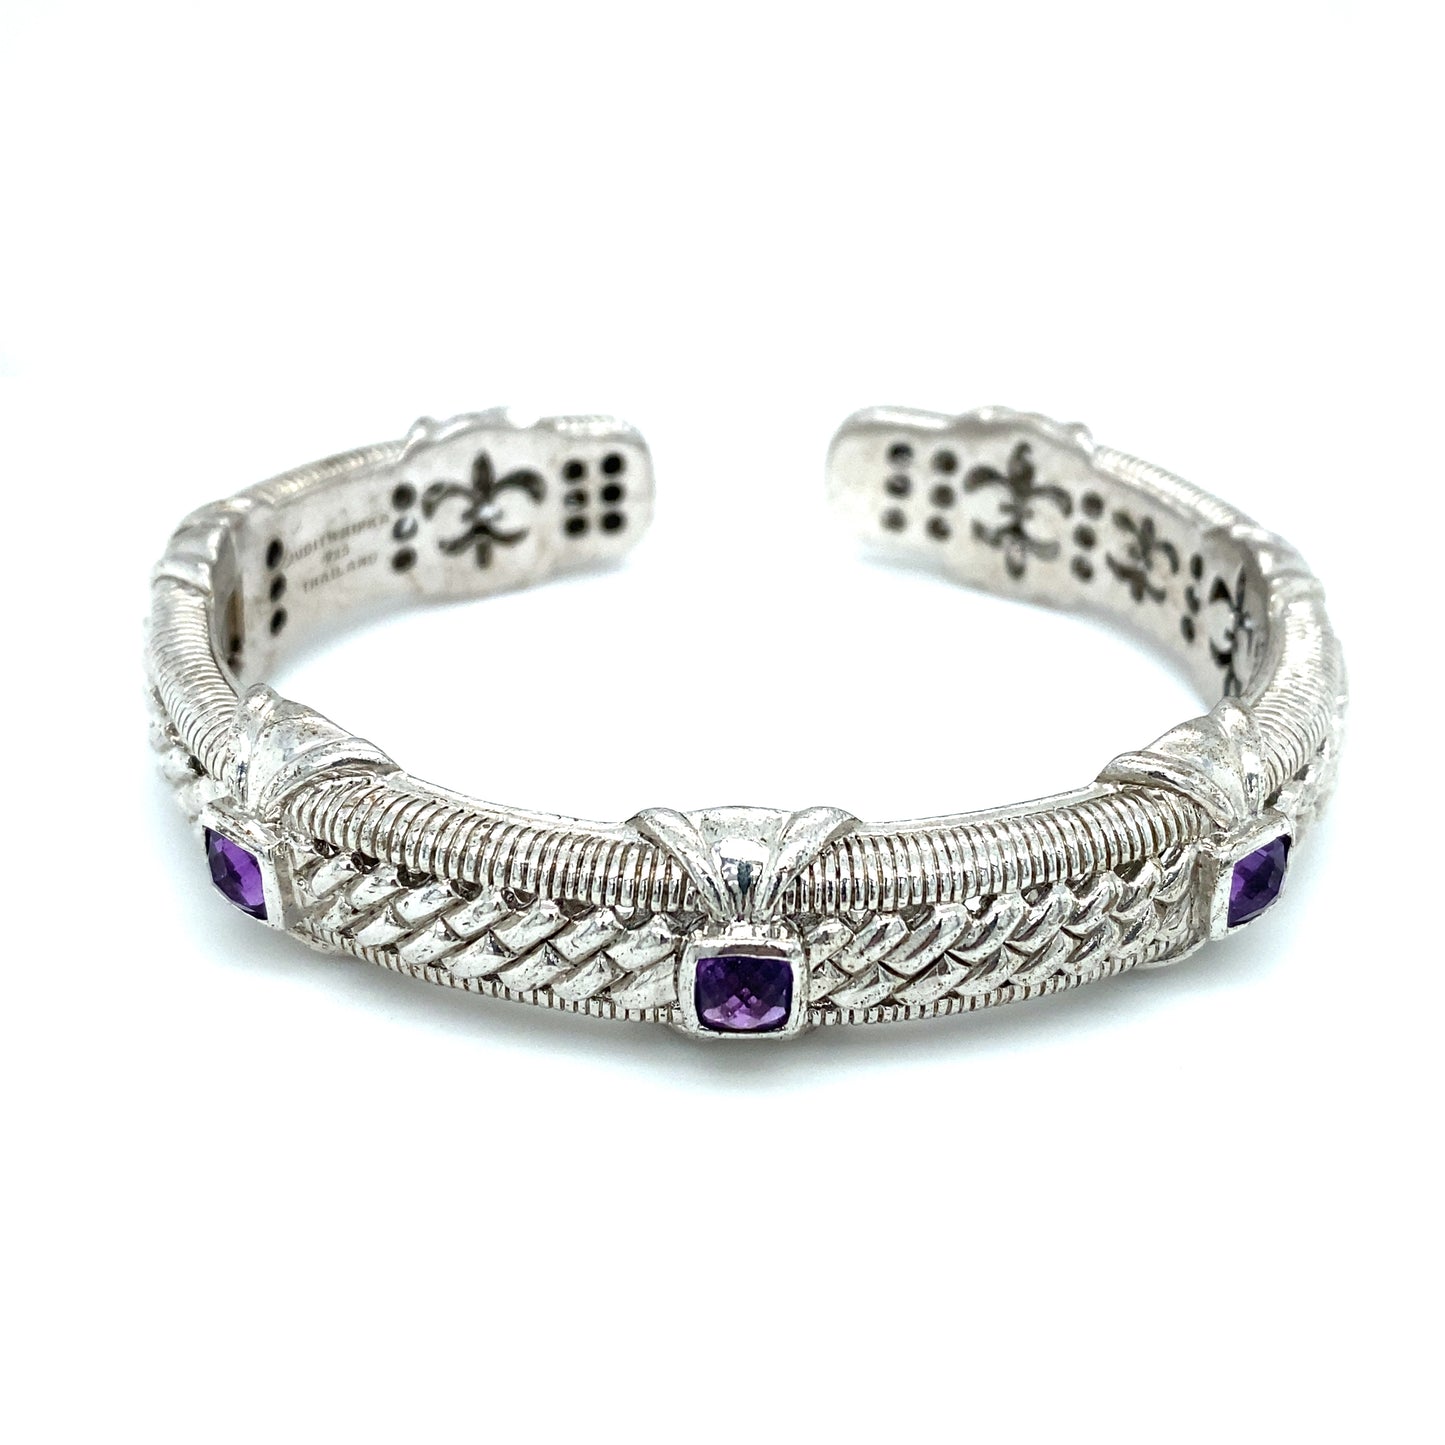 JUDITH RIPKA Hinged Cuff with Amethysts in Sterling Silver